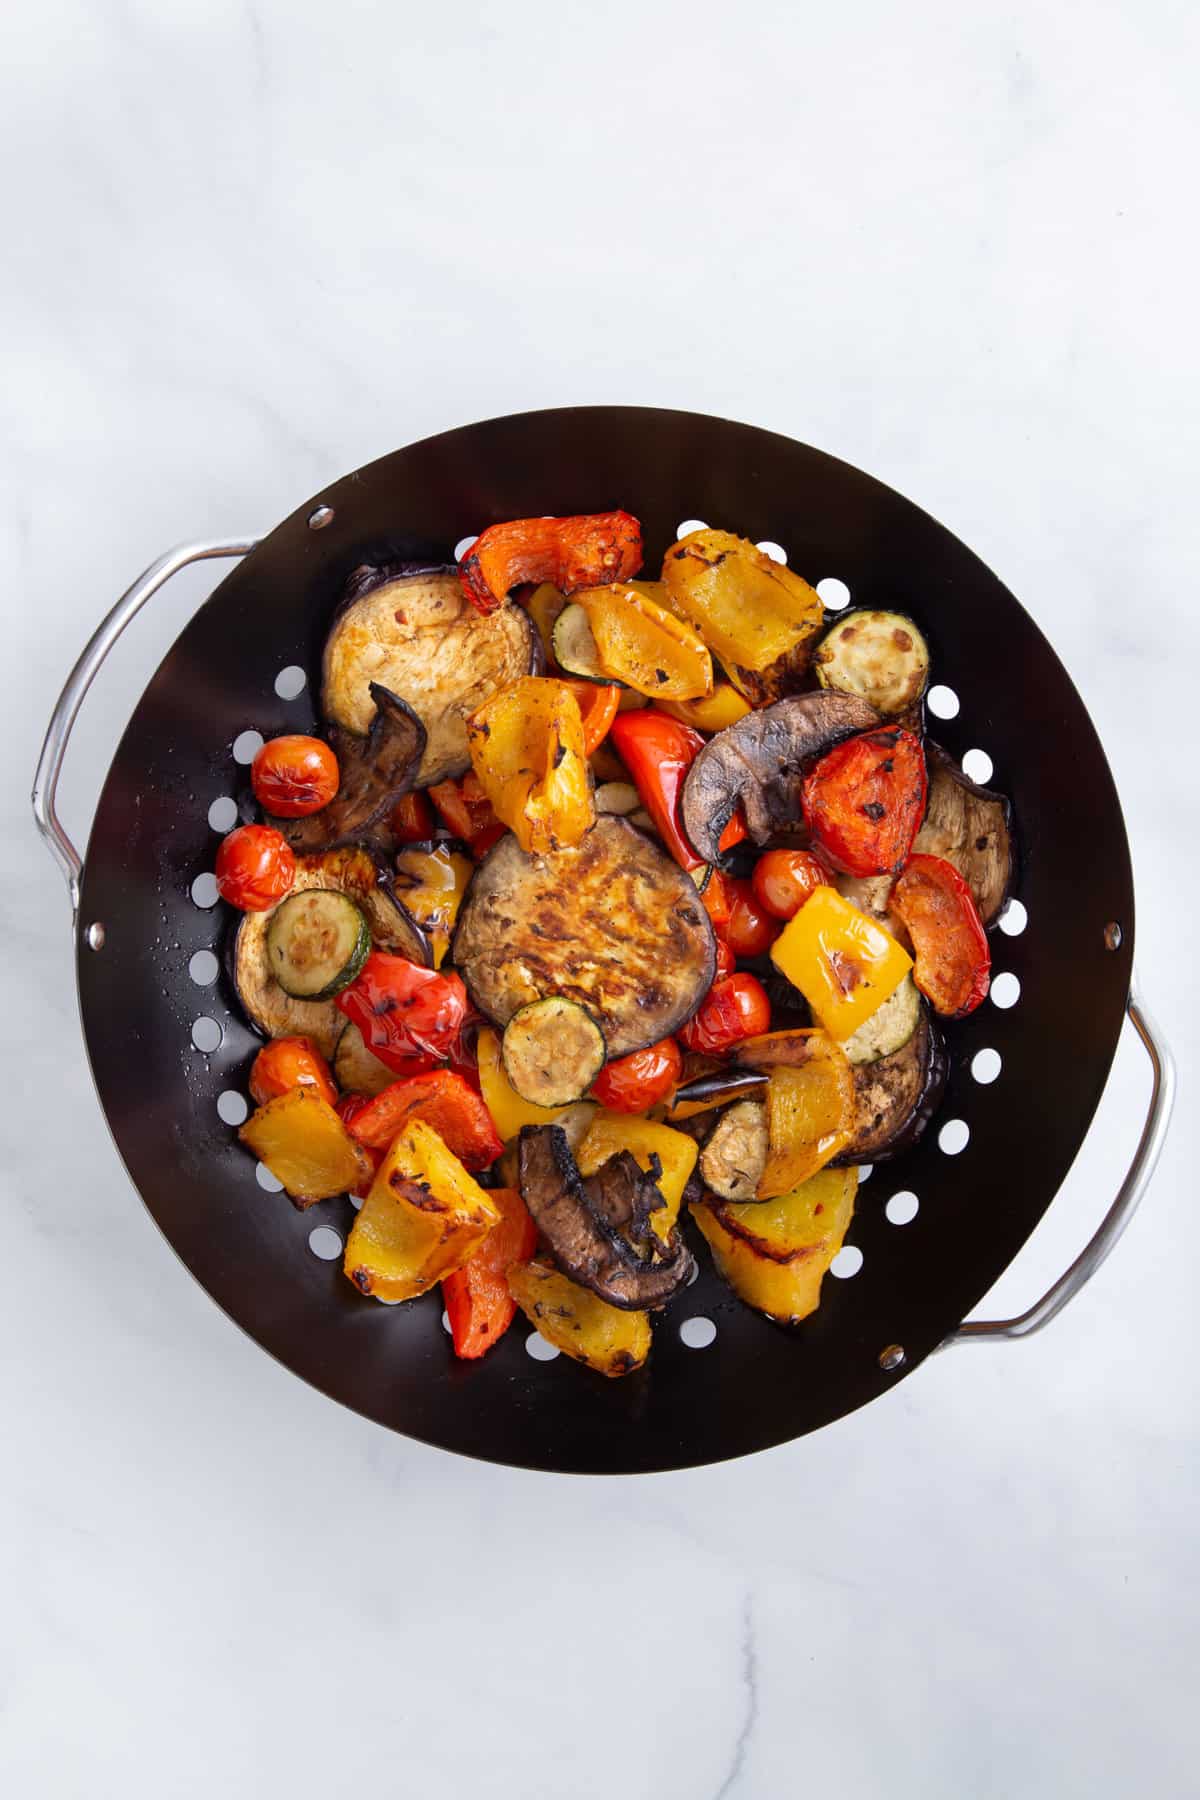 grilled vegetables tossed in marinade sitting in a large greased grill basket